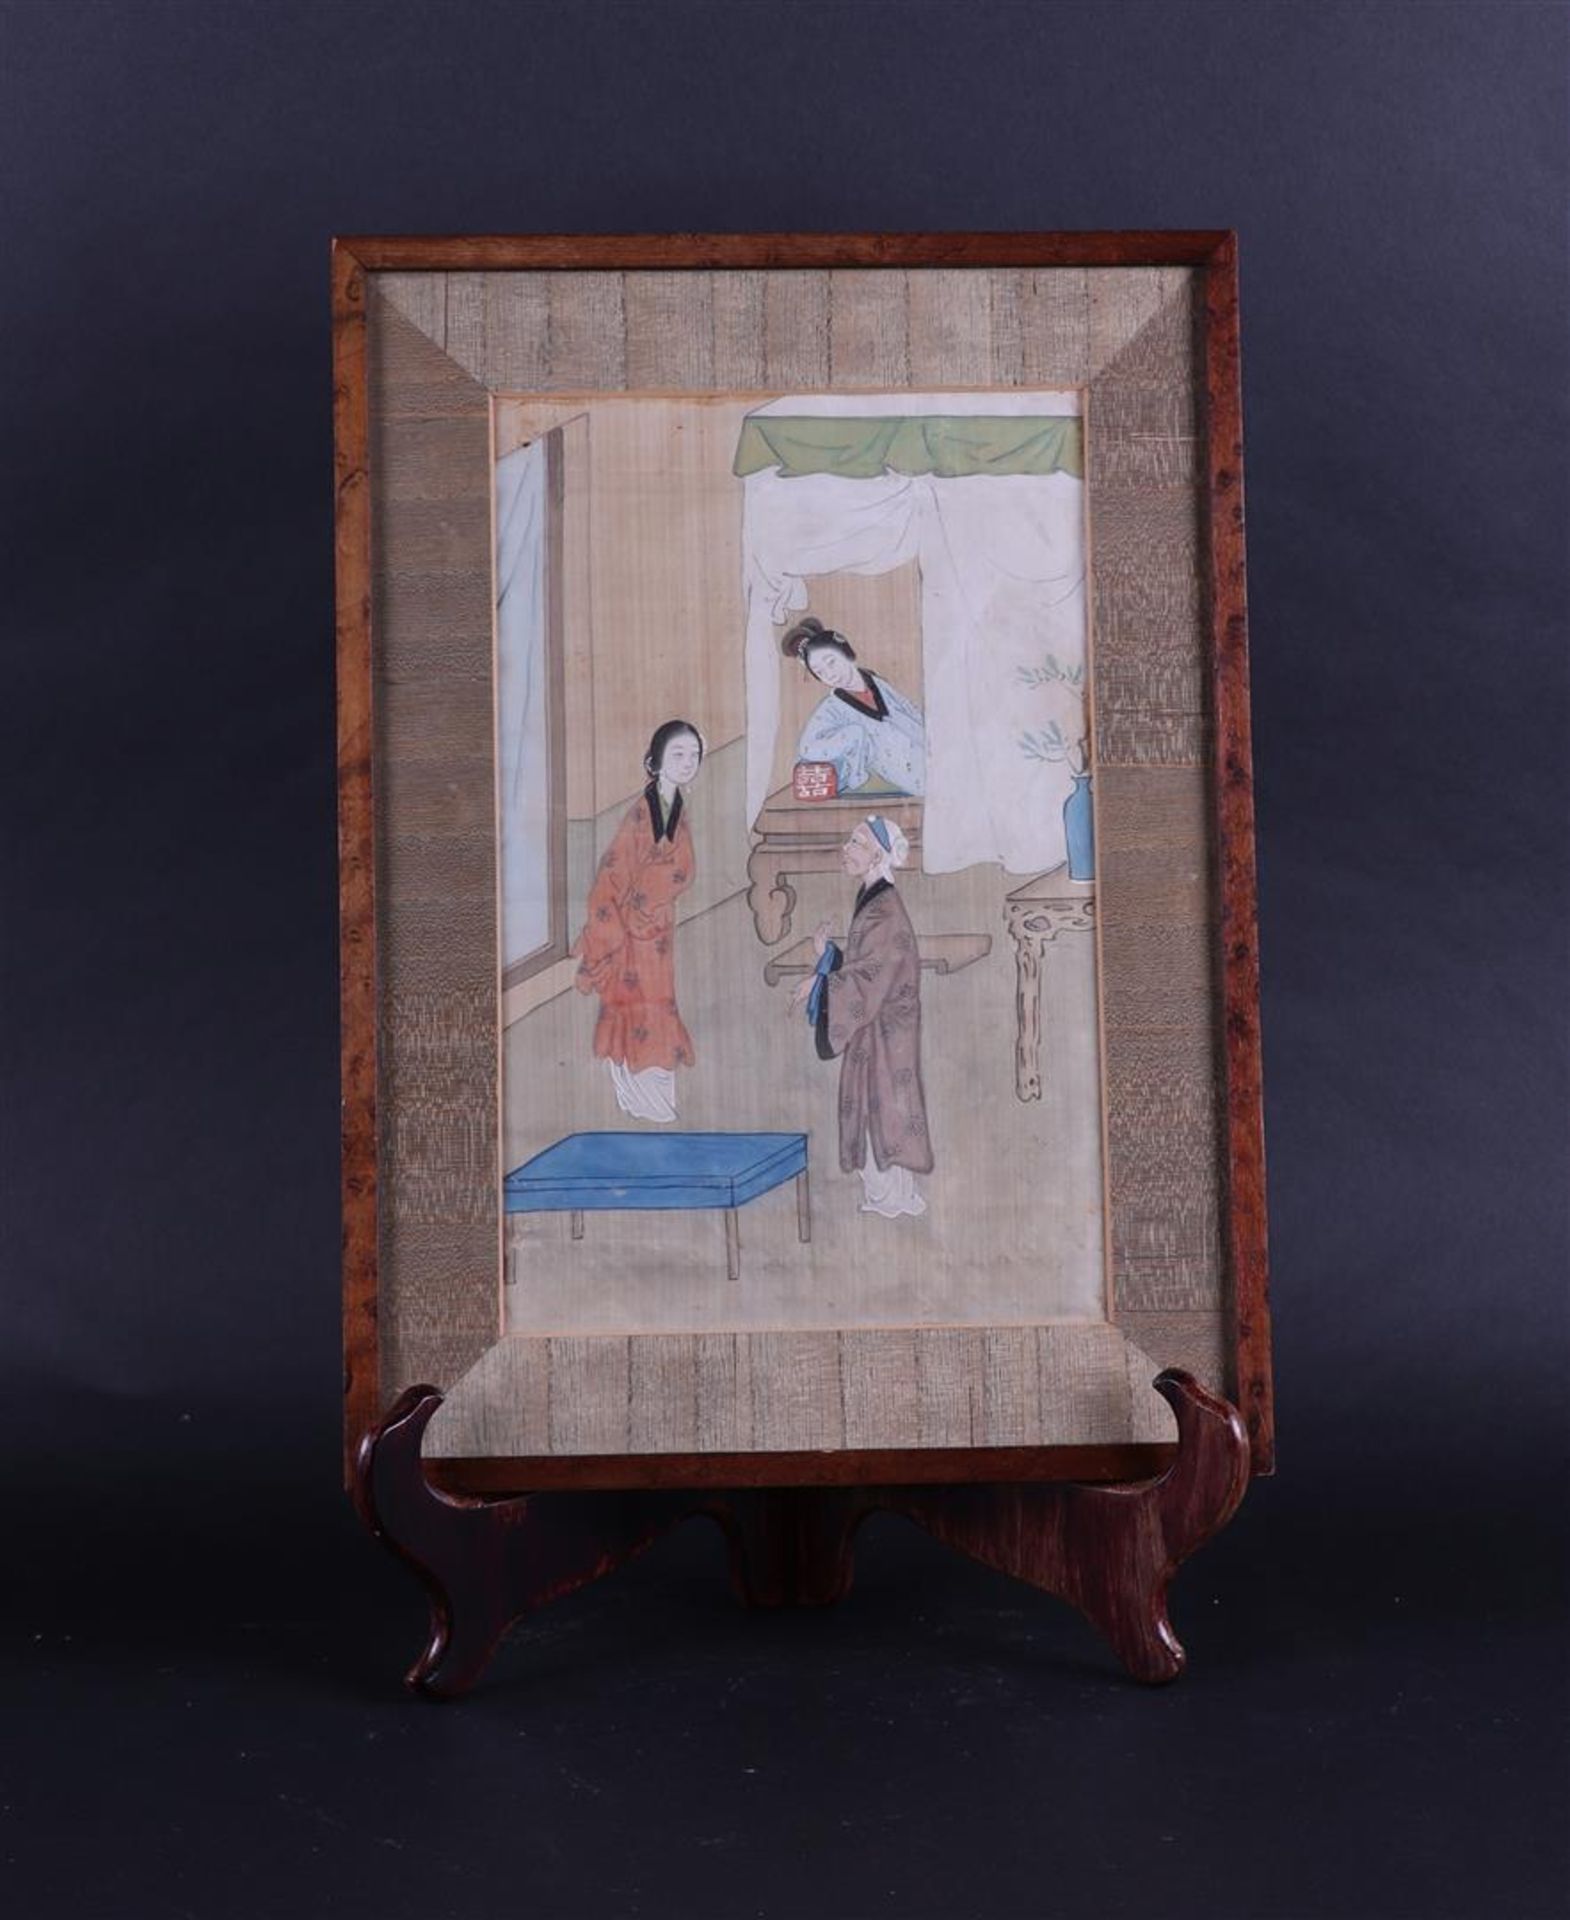 A 19th century painting on silk depicting a scene of two ladies-in-waiting and a gentleman.